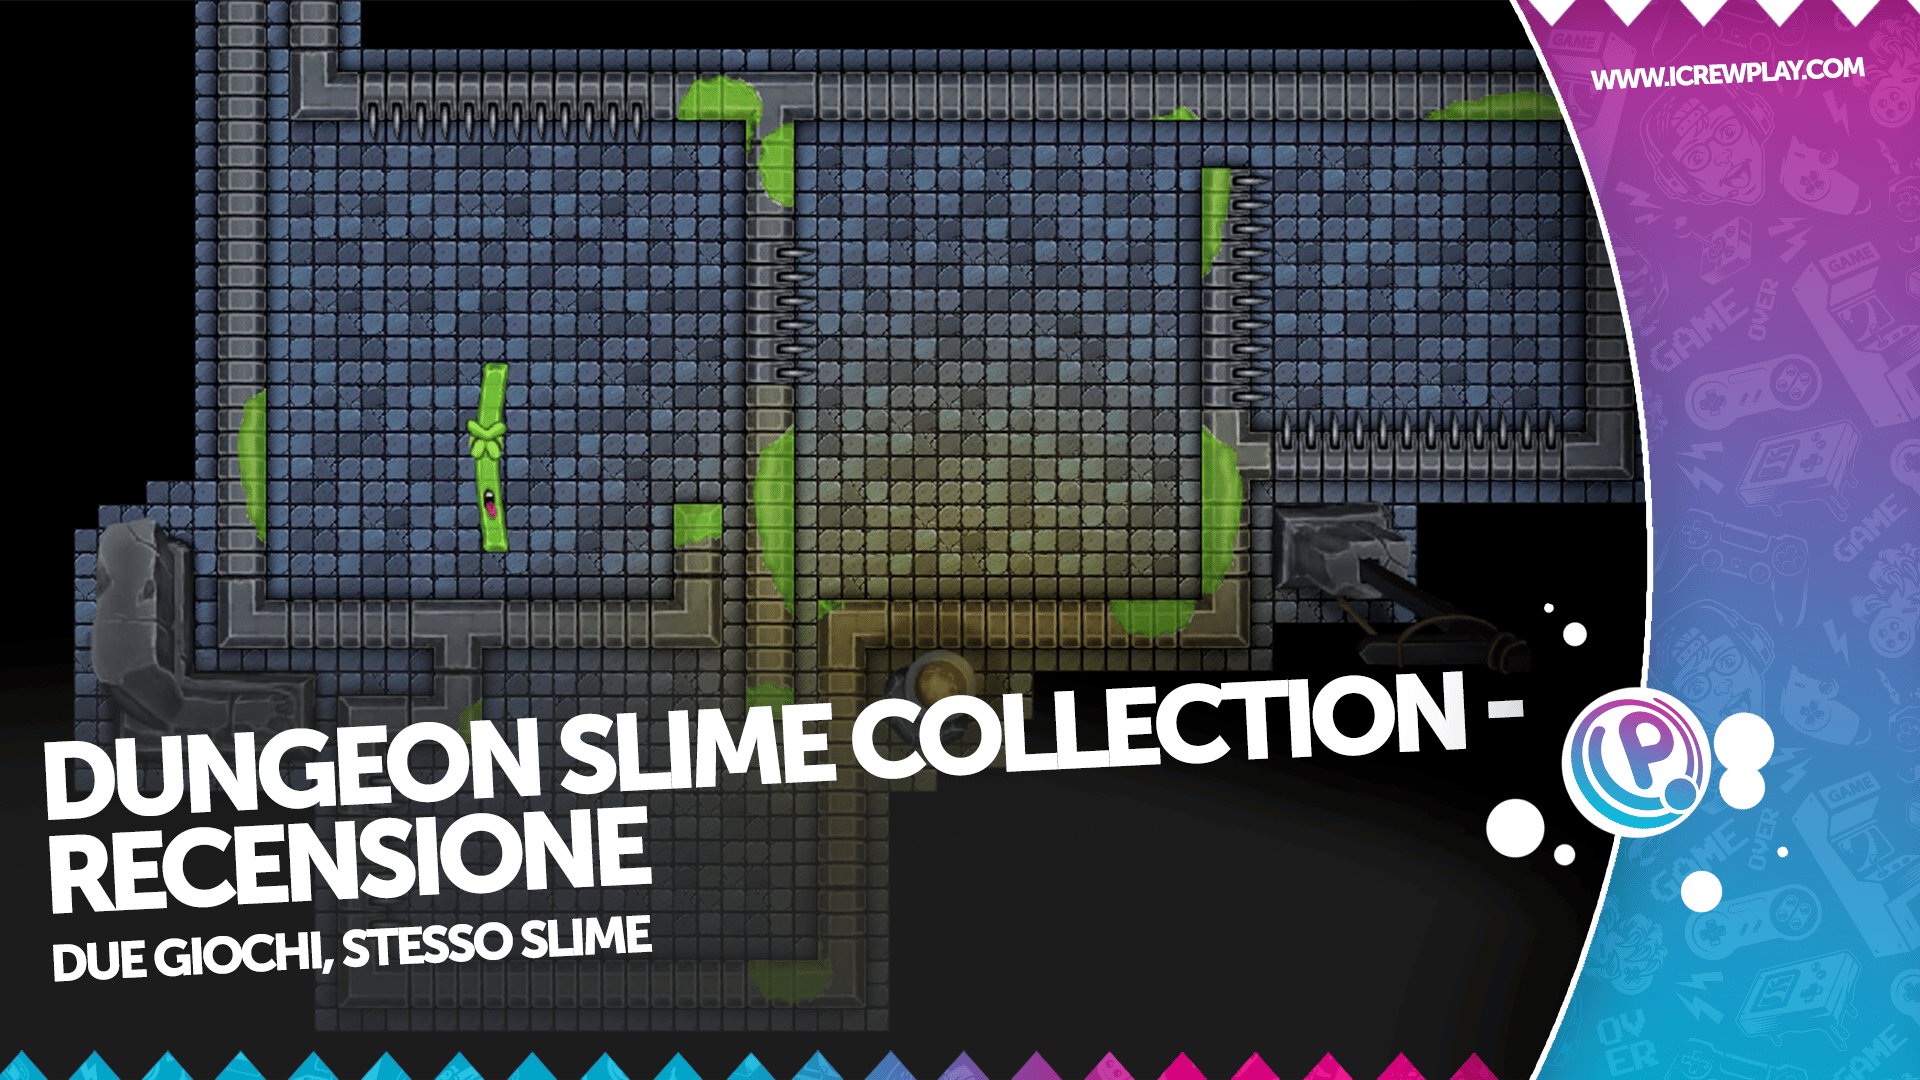 Dungeon Slime Collection - Recensione per Nintendo Switch 4